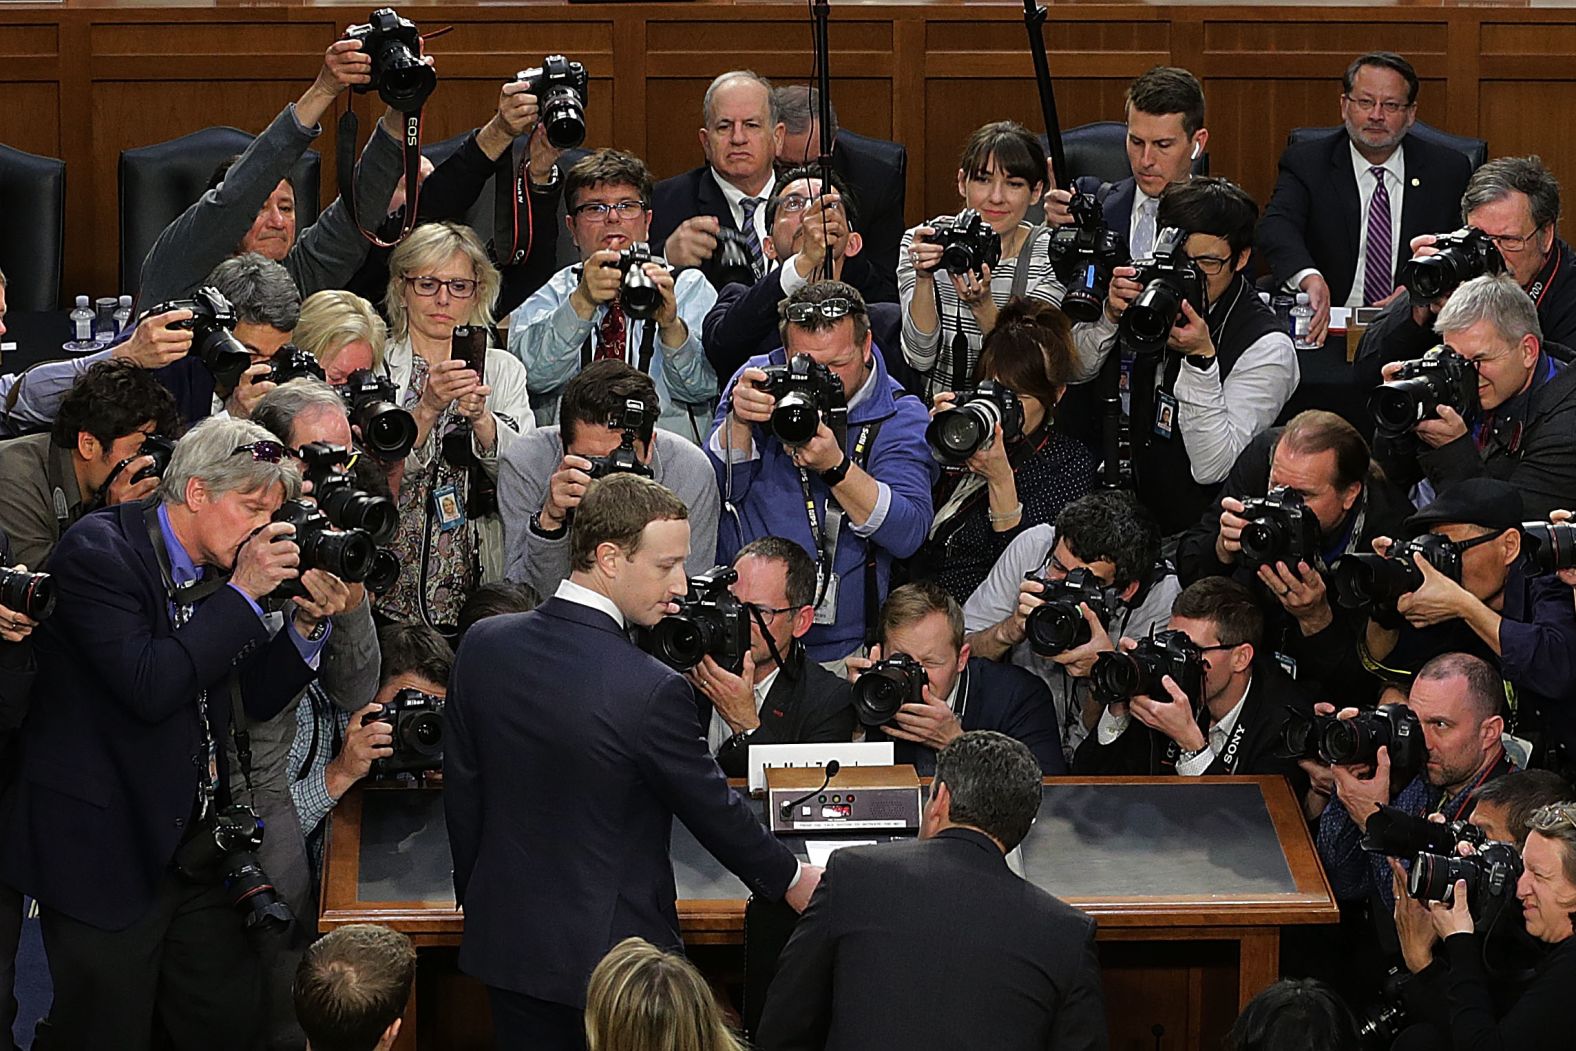 Zuckerberg arrives to testify before a US Senate committee in 2018. Zuckerberg apologized to members of Congress for a <a href="https://money.cnn.com/2018/04/11/technology/mark-zuckerberg-congress/index.html" target="_blank">data scandal that had been engulfing the social network</a>, and he said Facebook could have done more to protect its users' privacy.